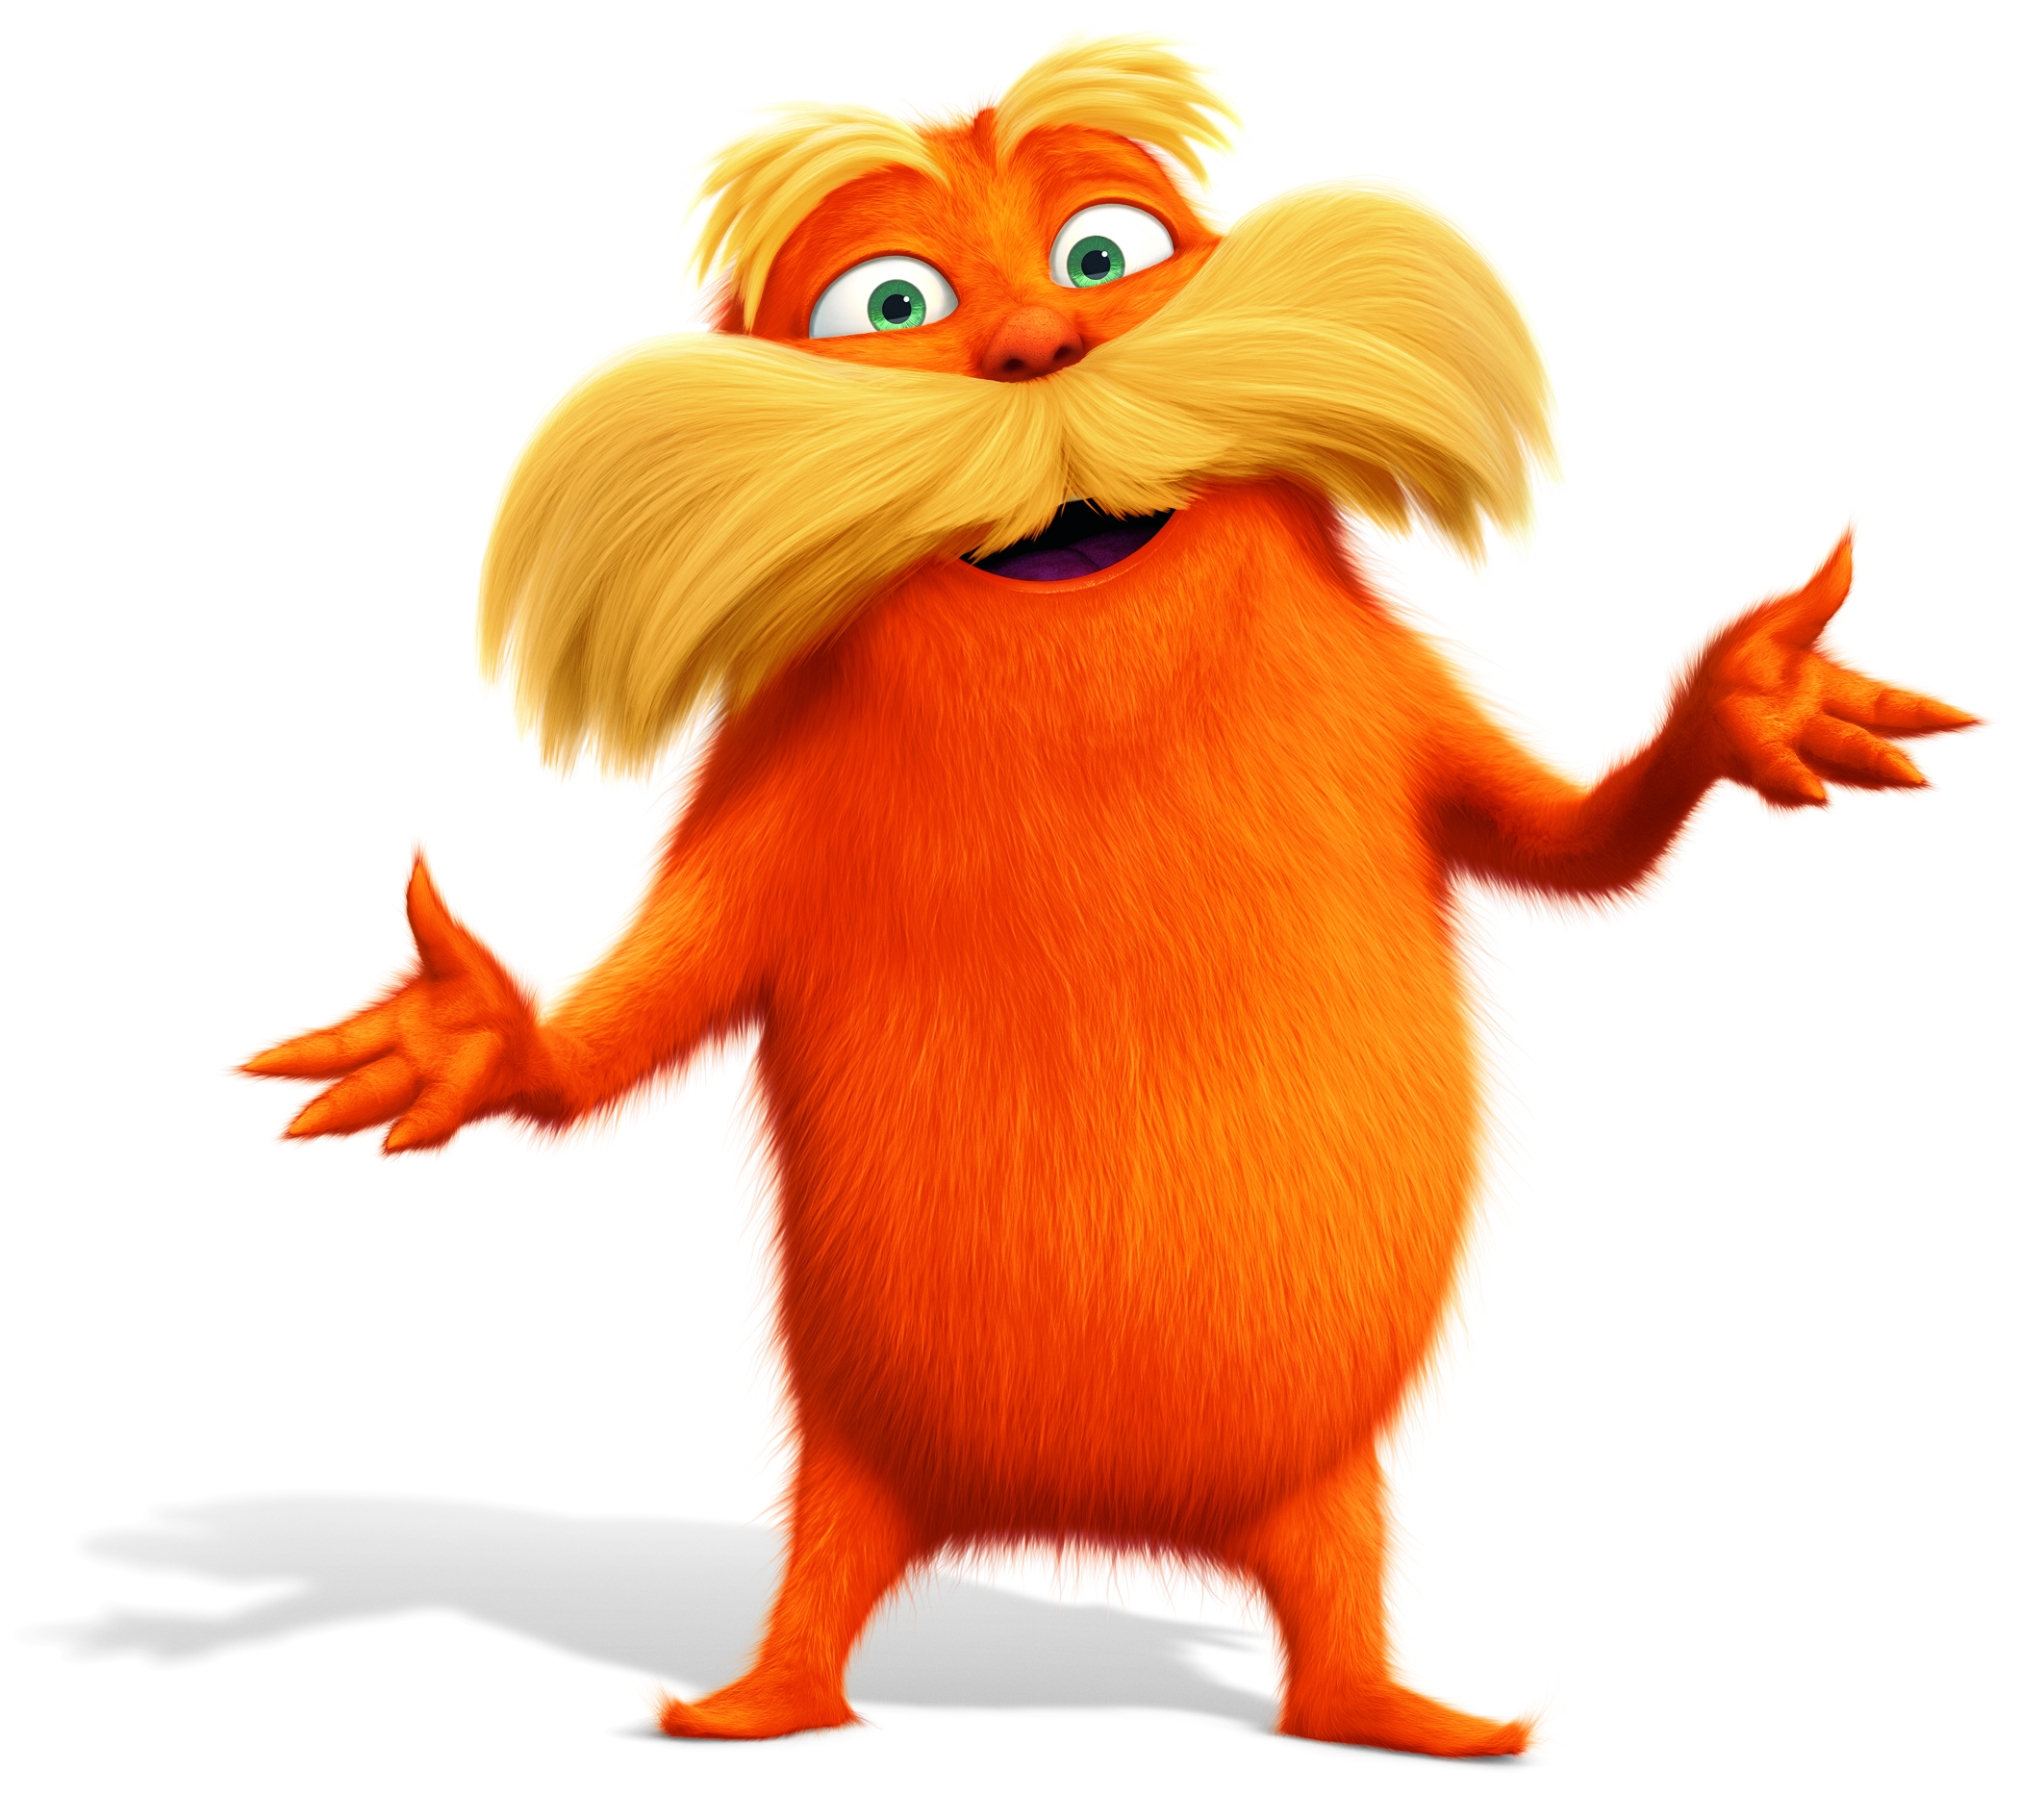 What Can We Learn From The Lorax?